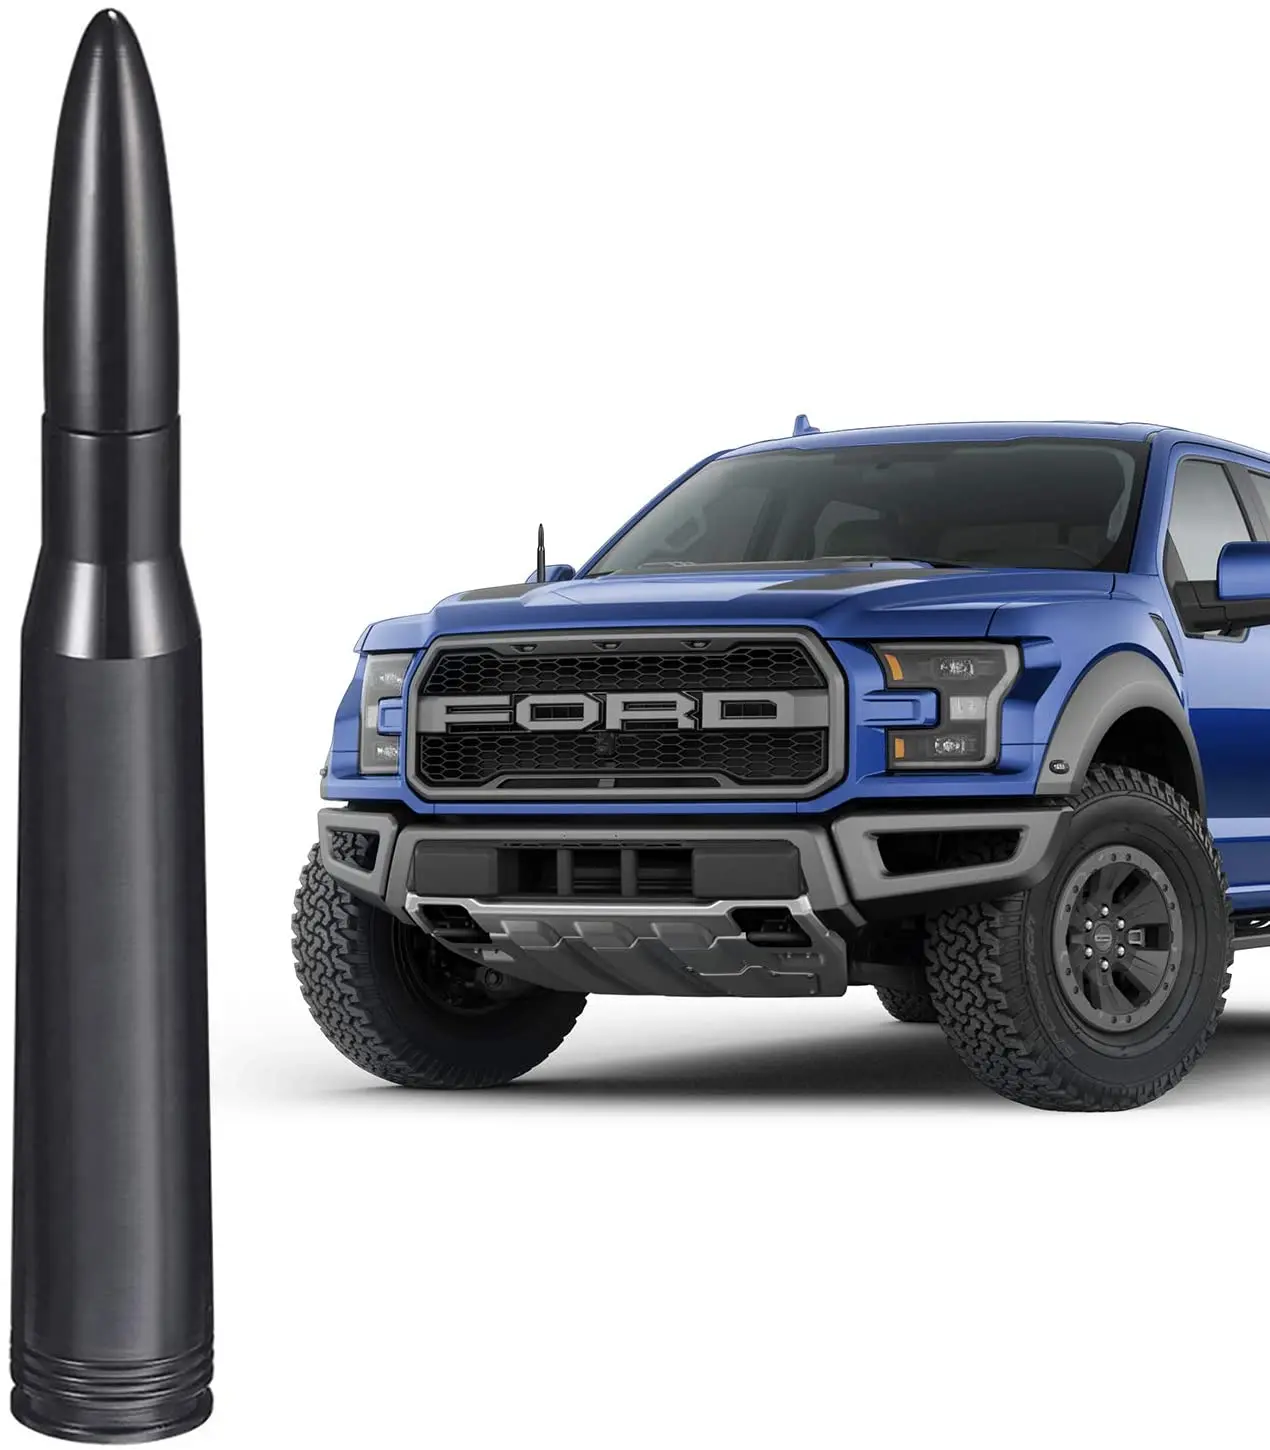 5.5-Inch Rubber+ABS Mast BASIKER Antenna for Ford F150 F250 F350 Radio Antenna Mast for Dodge Ram 1500 